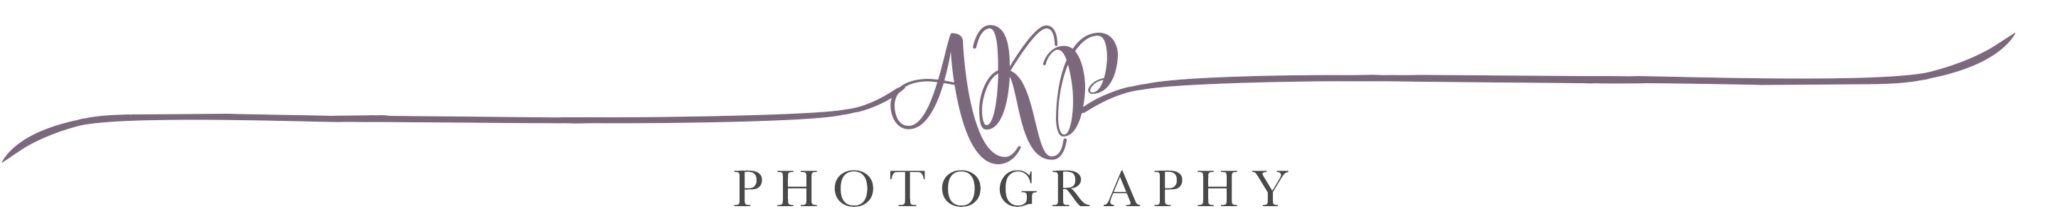 AKP Photography's New Logo